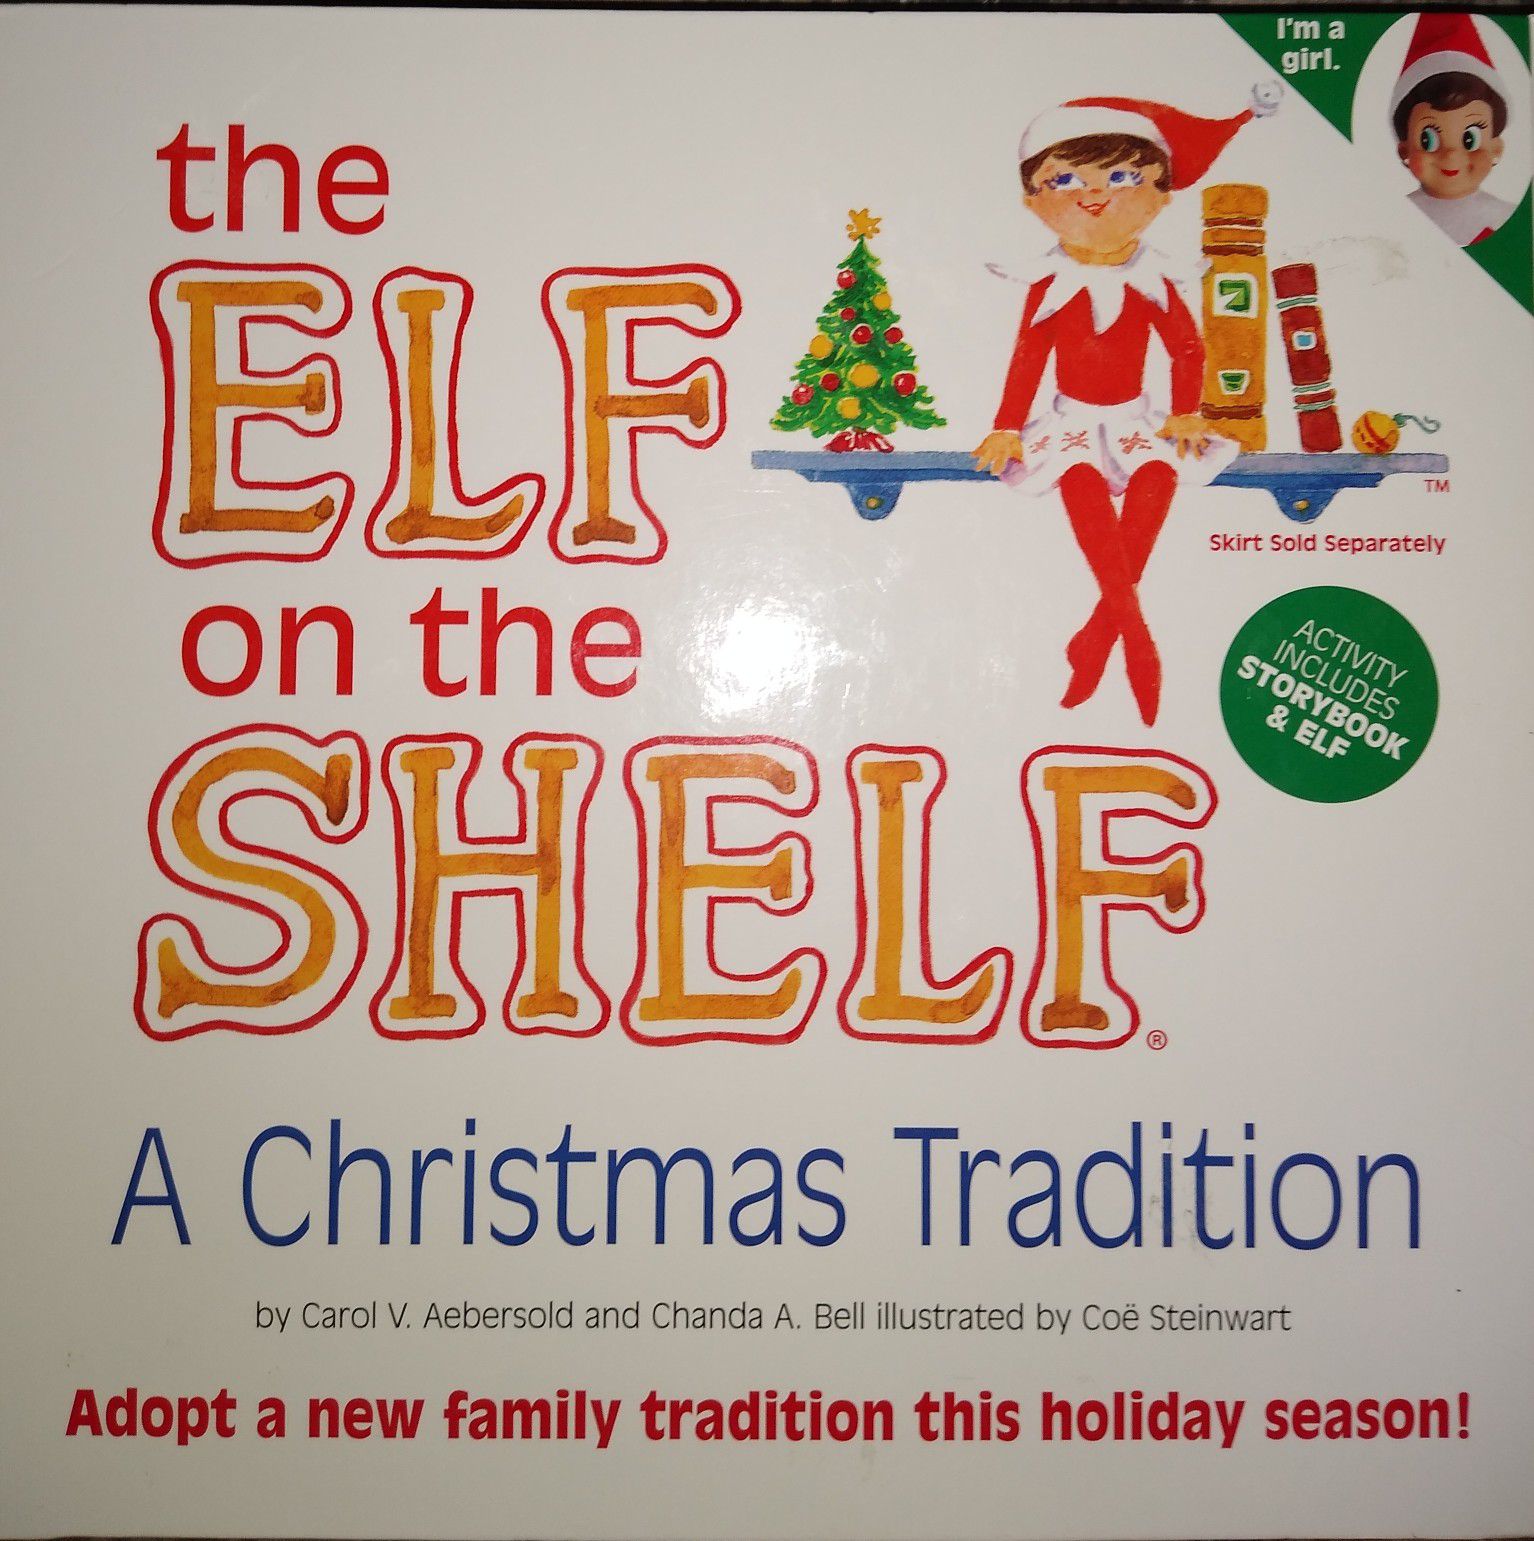 The elf on the shelf a Christmas tradition